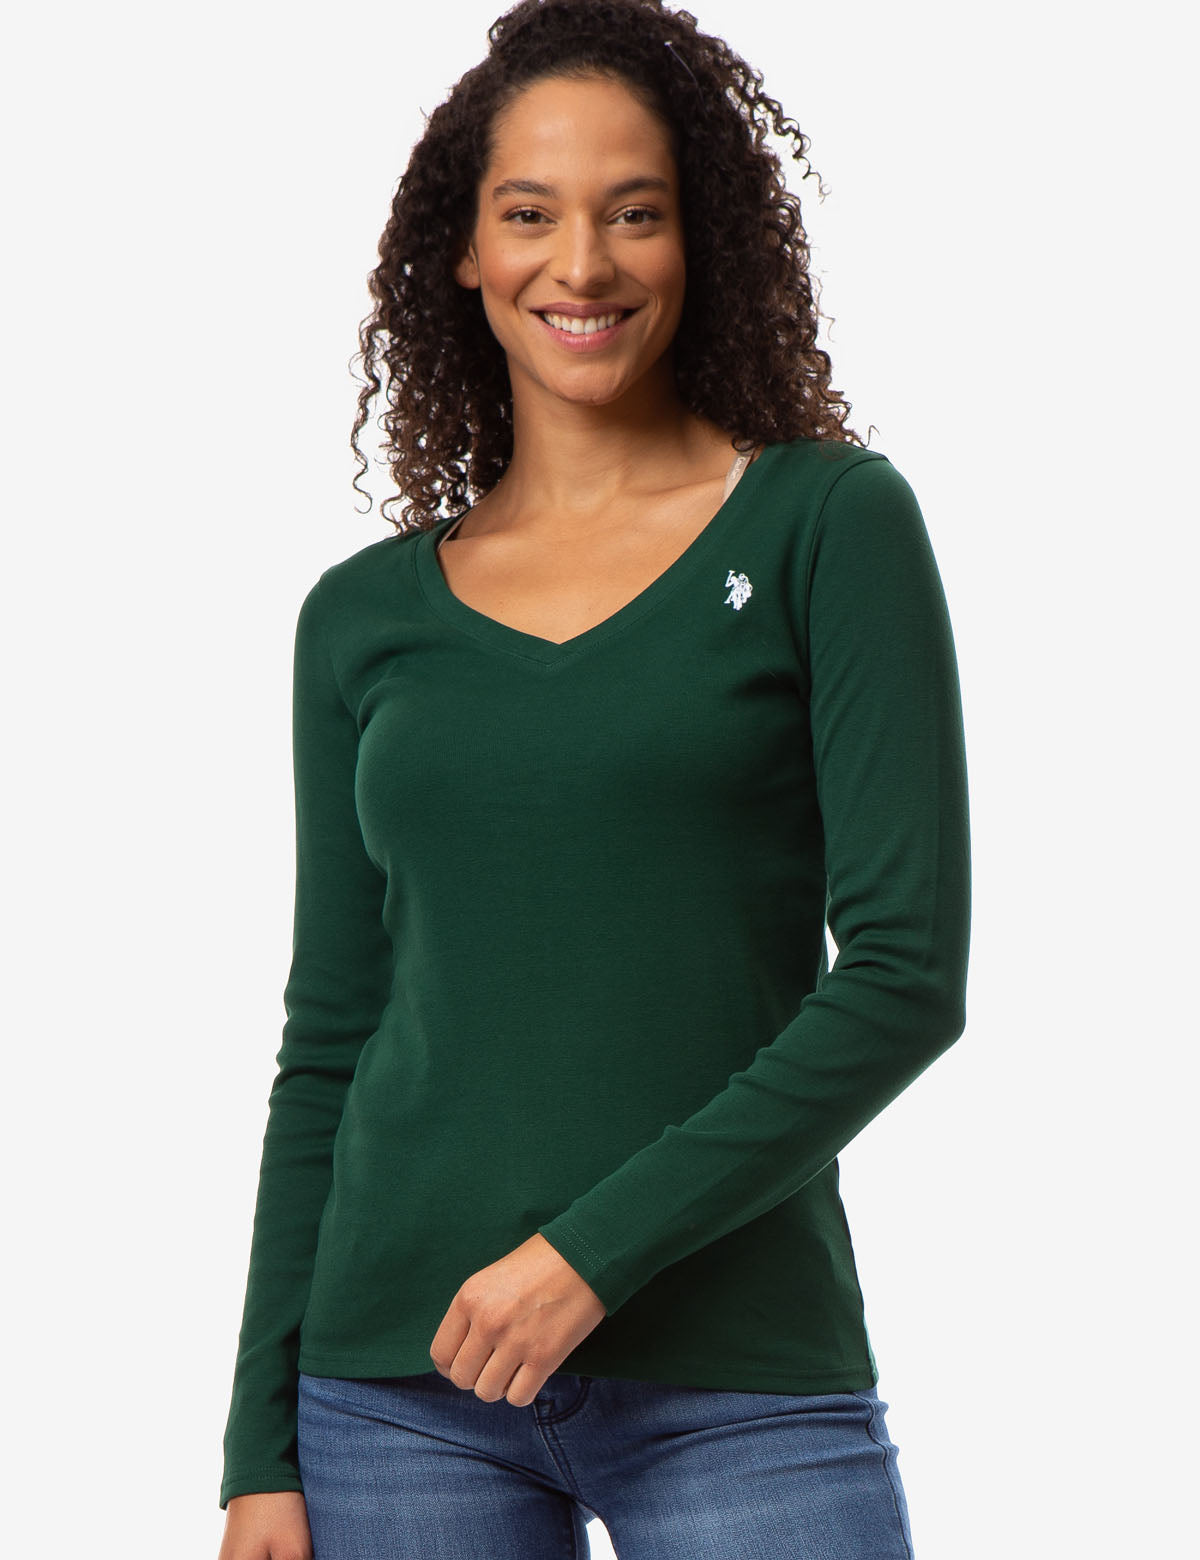 polo neck t shirts for women